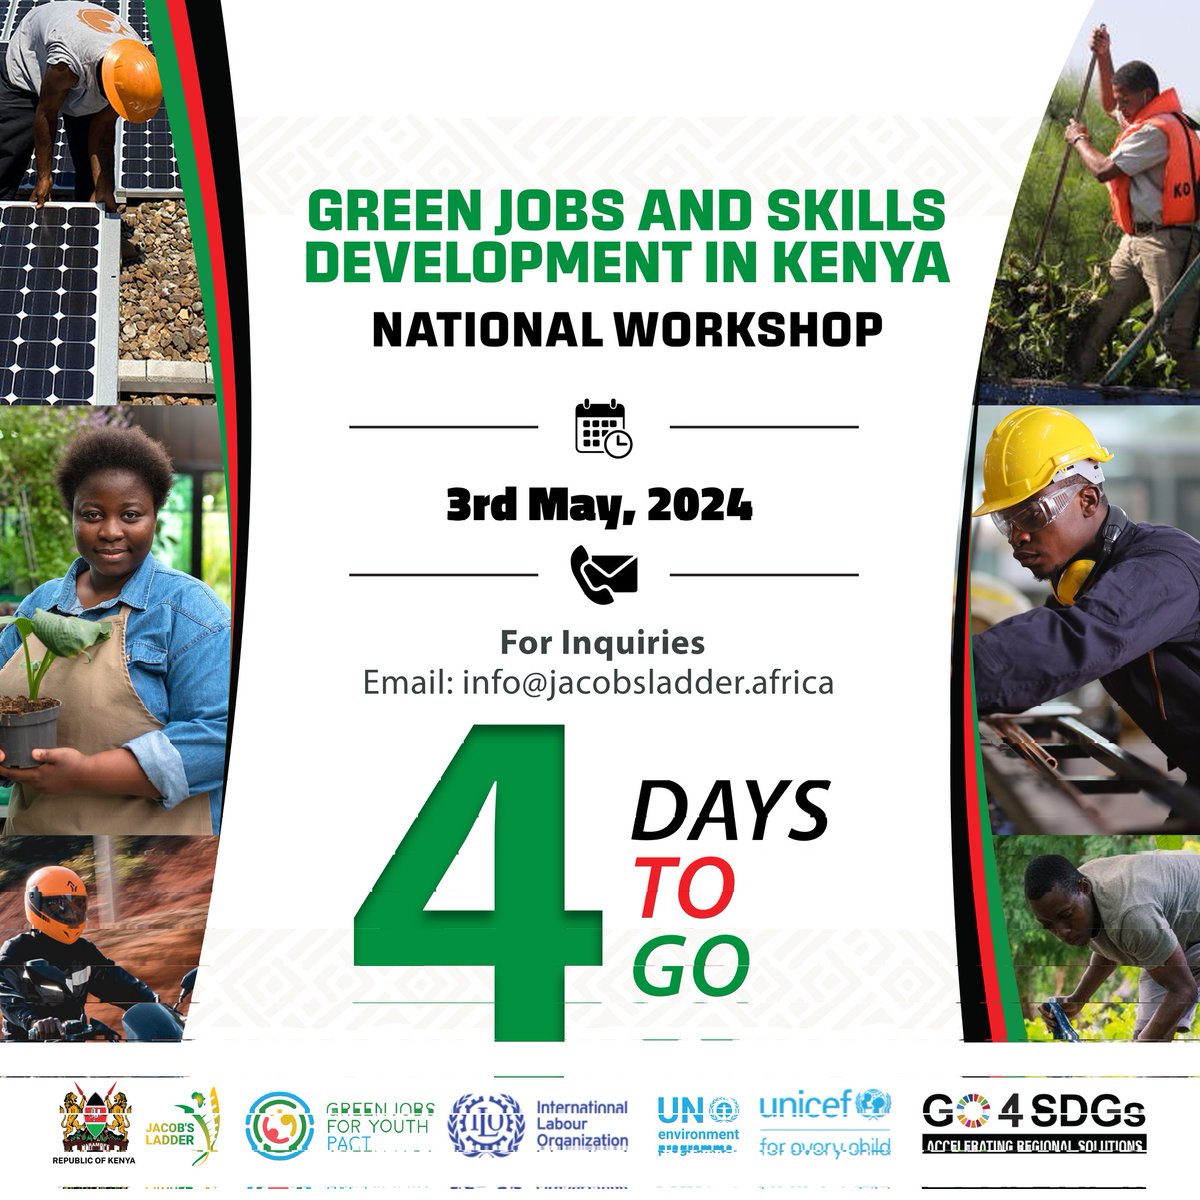 Only 4 DAYS LEFT!

Keep the conversation going by sharing your thoughts and support using our official hashtag #TwendeGreenKE, and together let's amplify the movement towards a greener future for Kenya! 🇰🇪

#TwendeGreenKE #Greenjobs #Greenskills #Circulareconomy #BETA